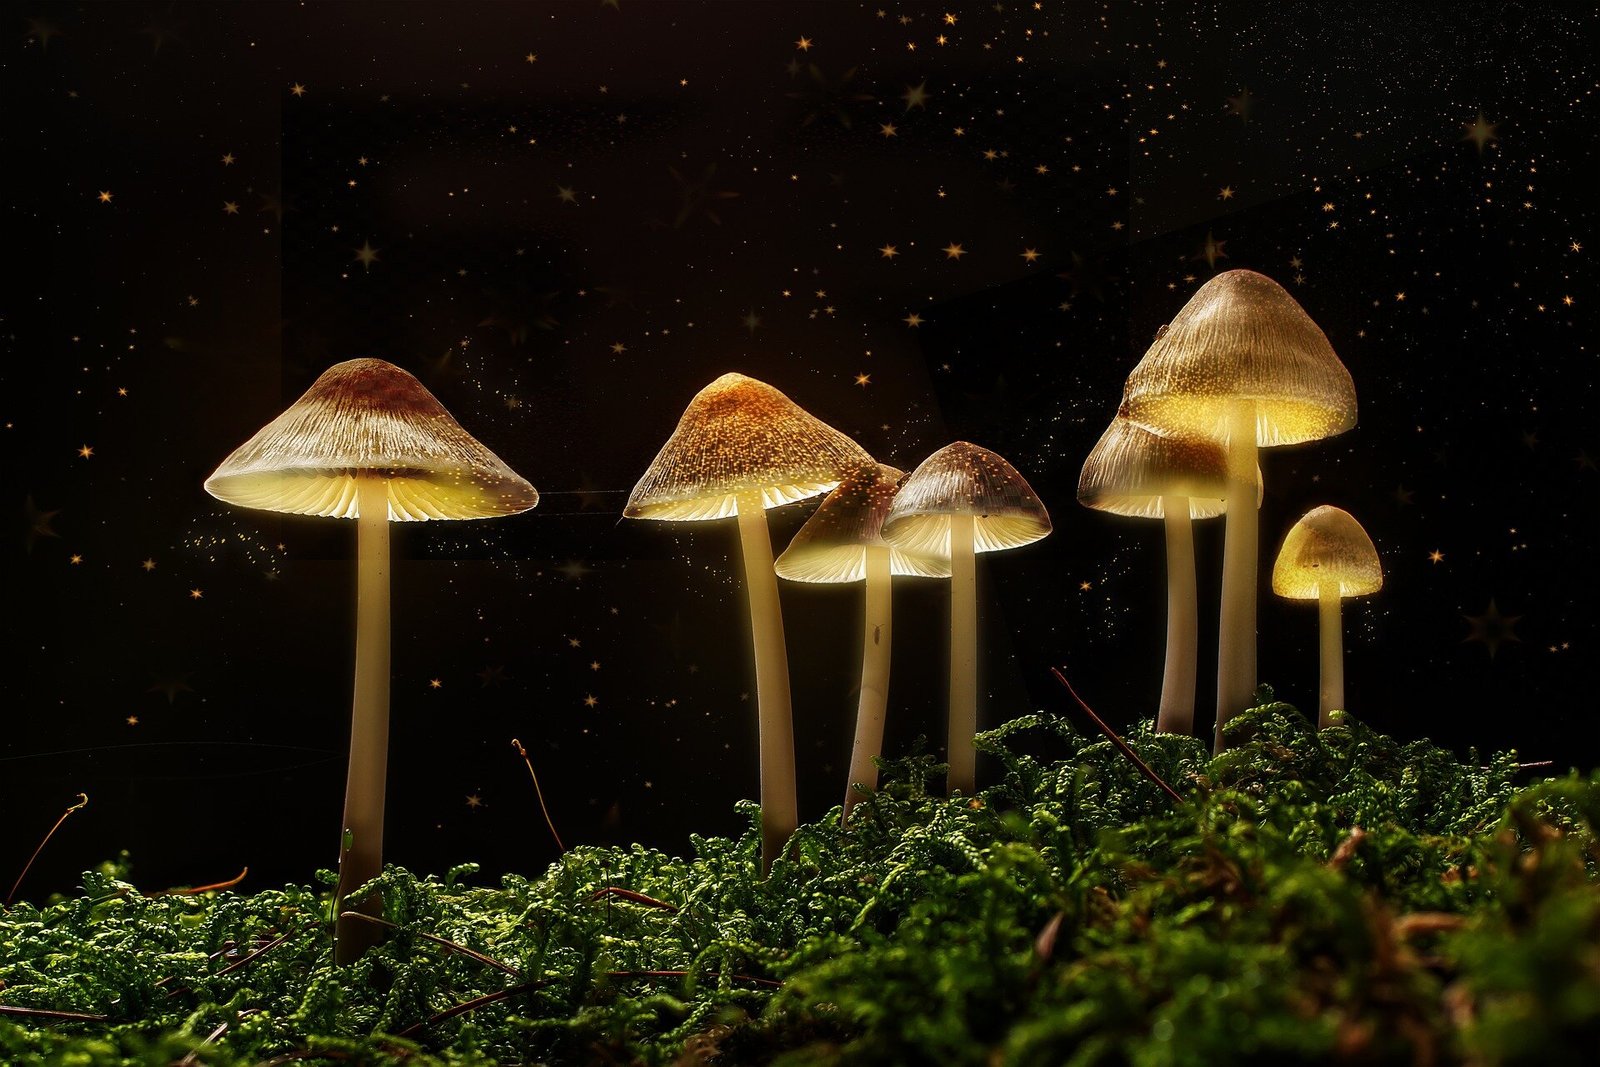 Magic mushrooms may one day treat anorexia but not just yet